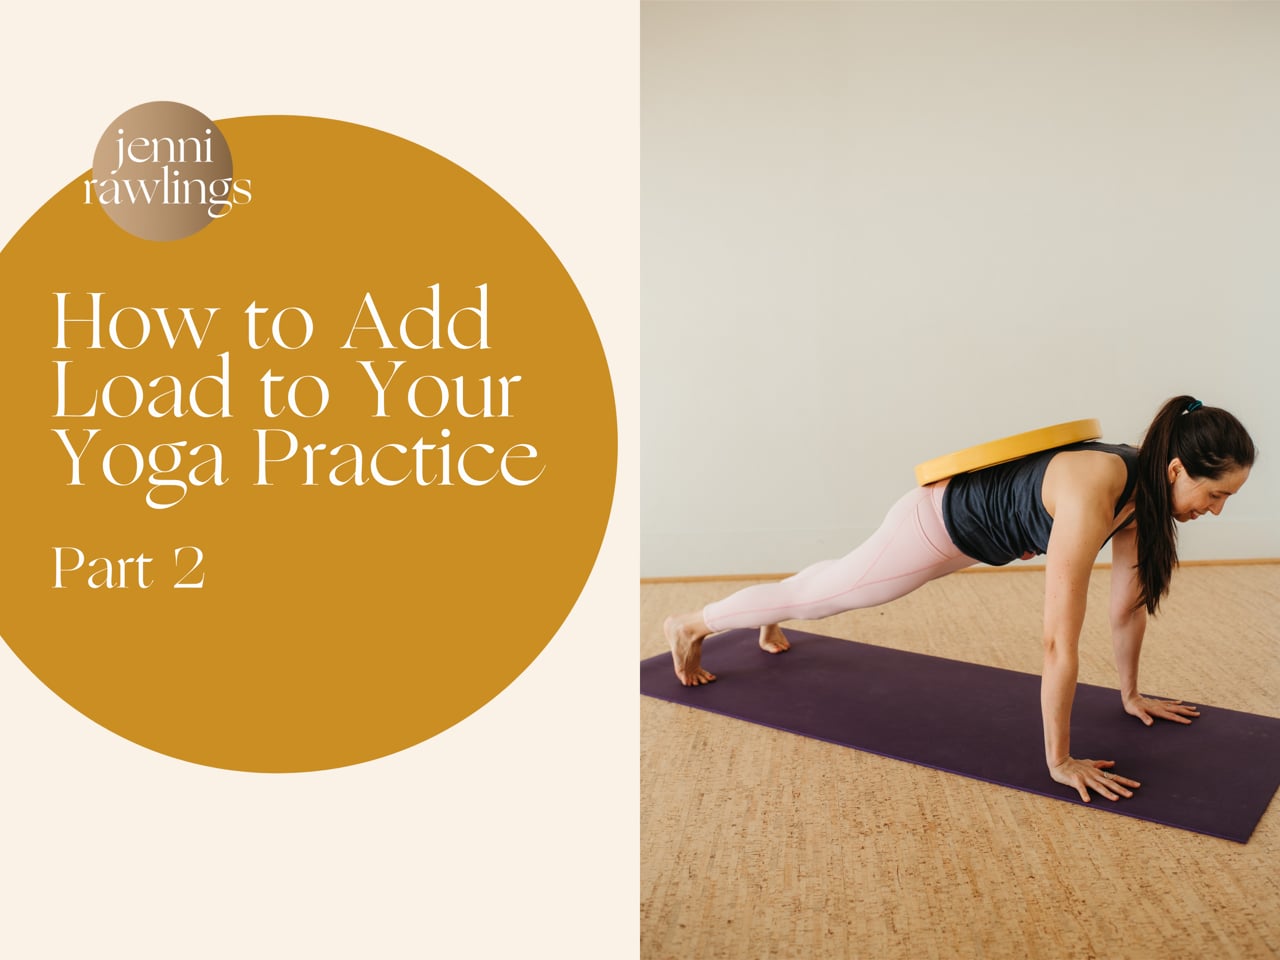 How to Add Load to Your Yoga Practice, Part 2